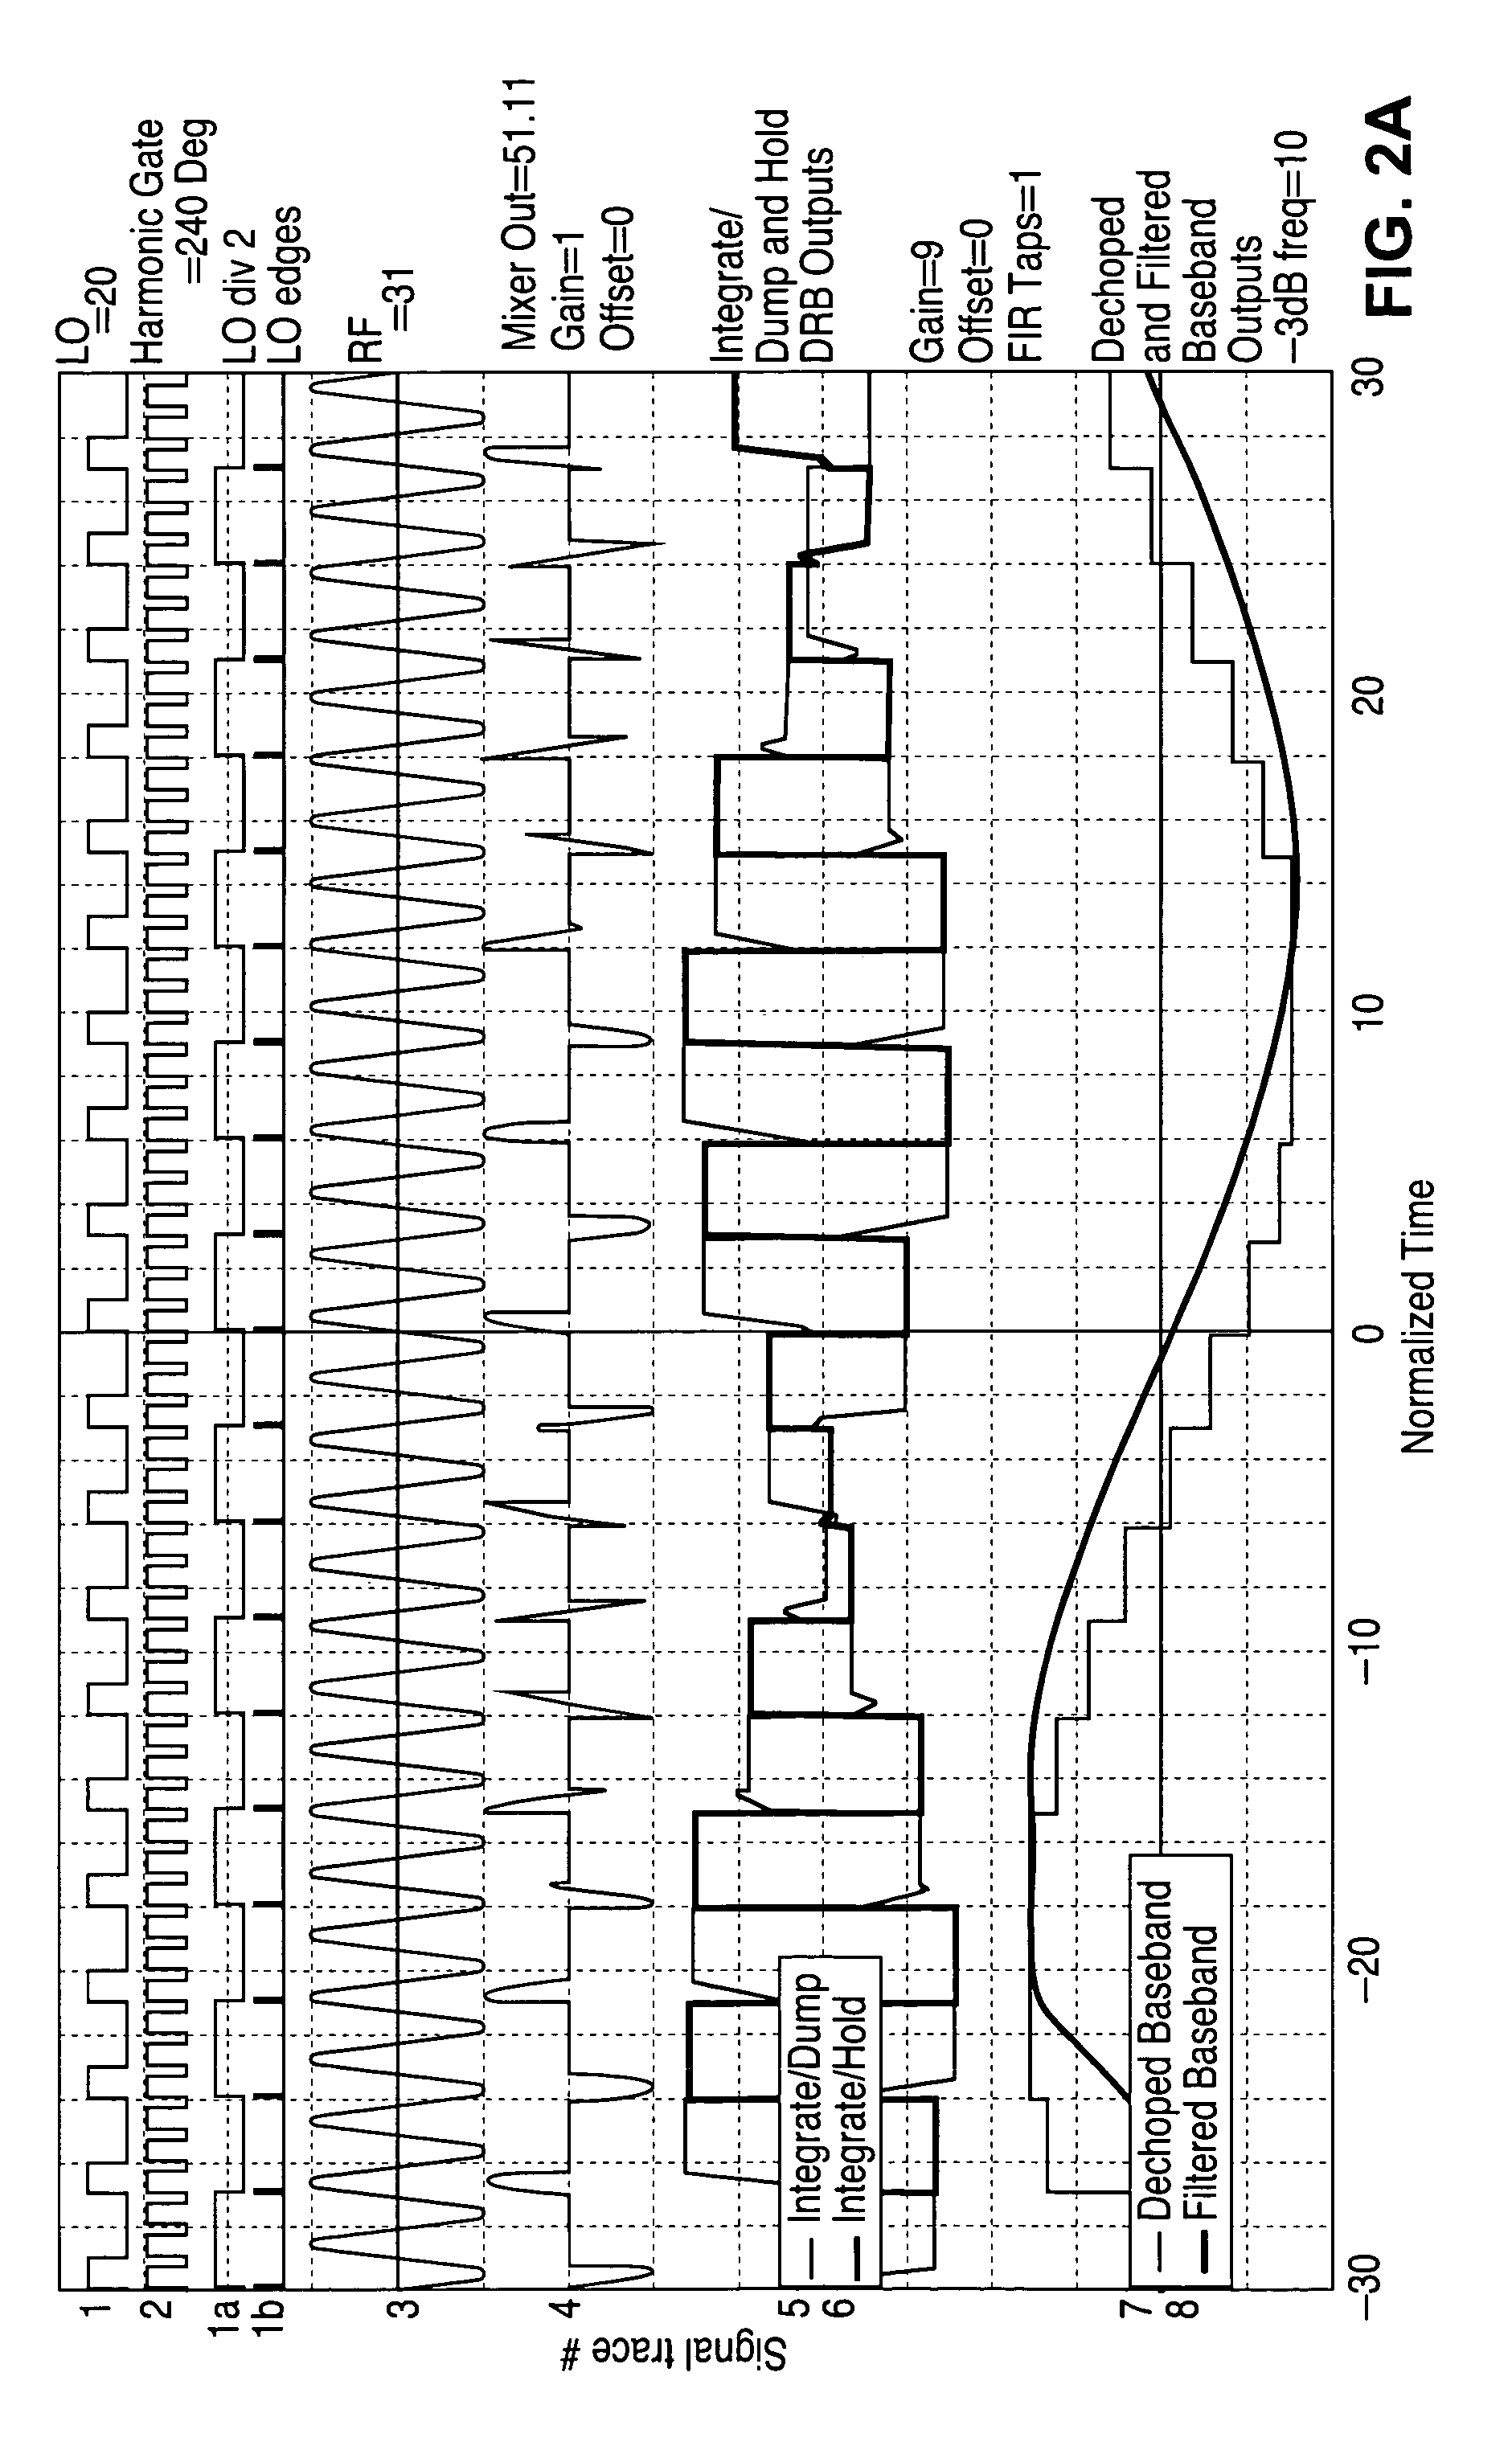 Phase-alternating mixer with alias and harmonic rejection